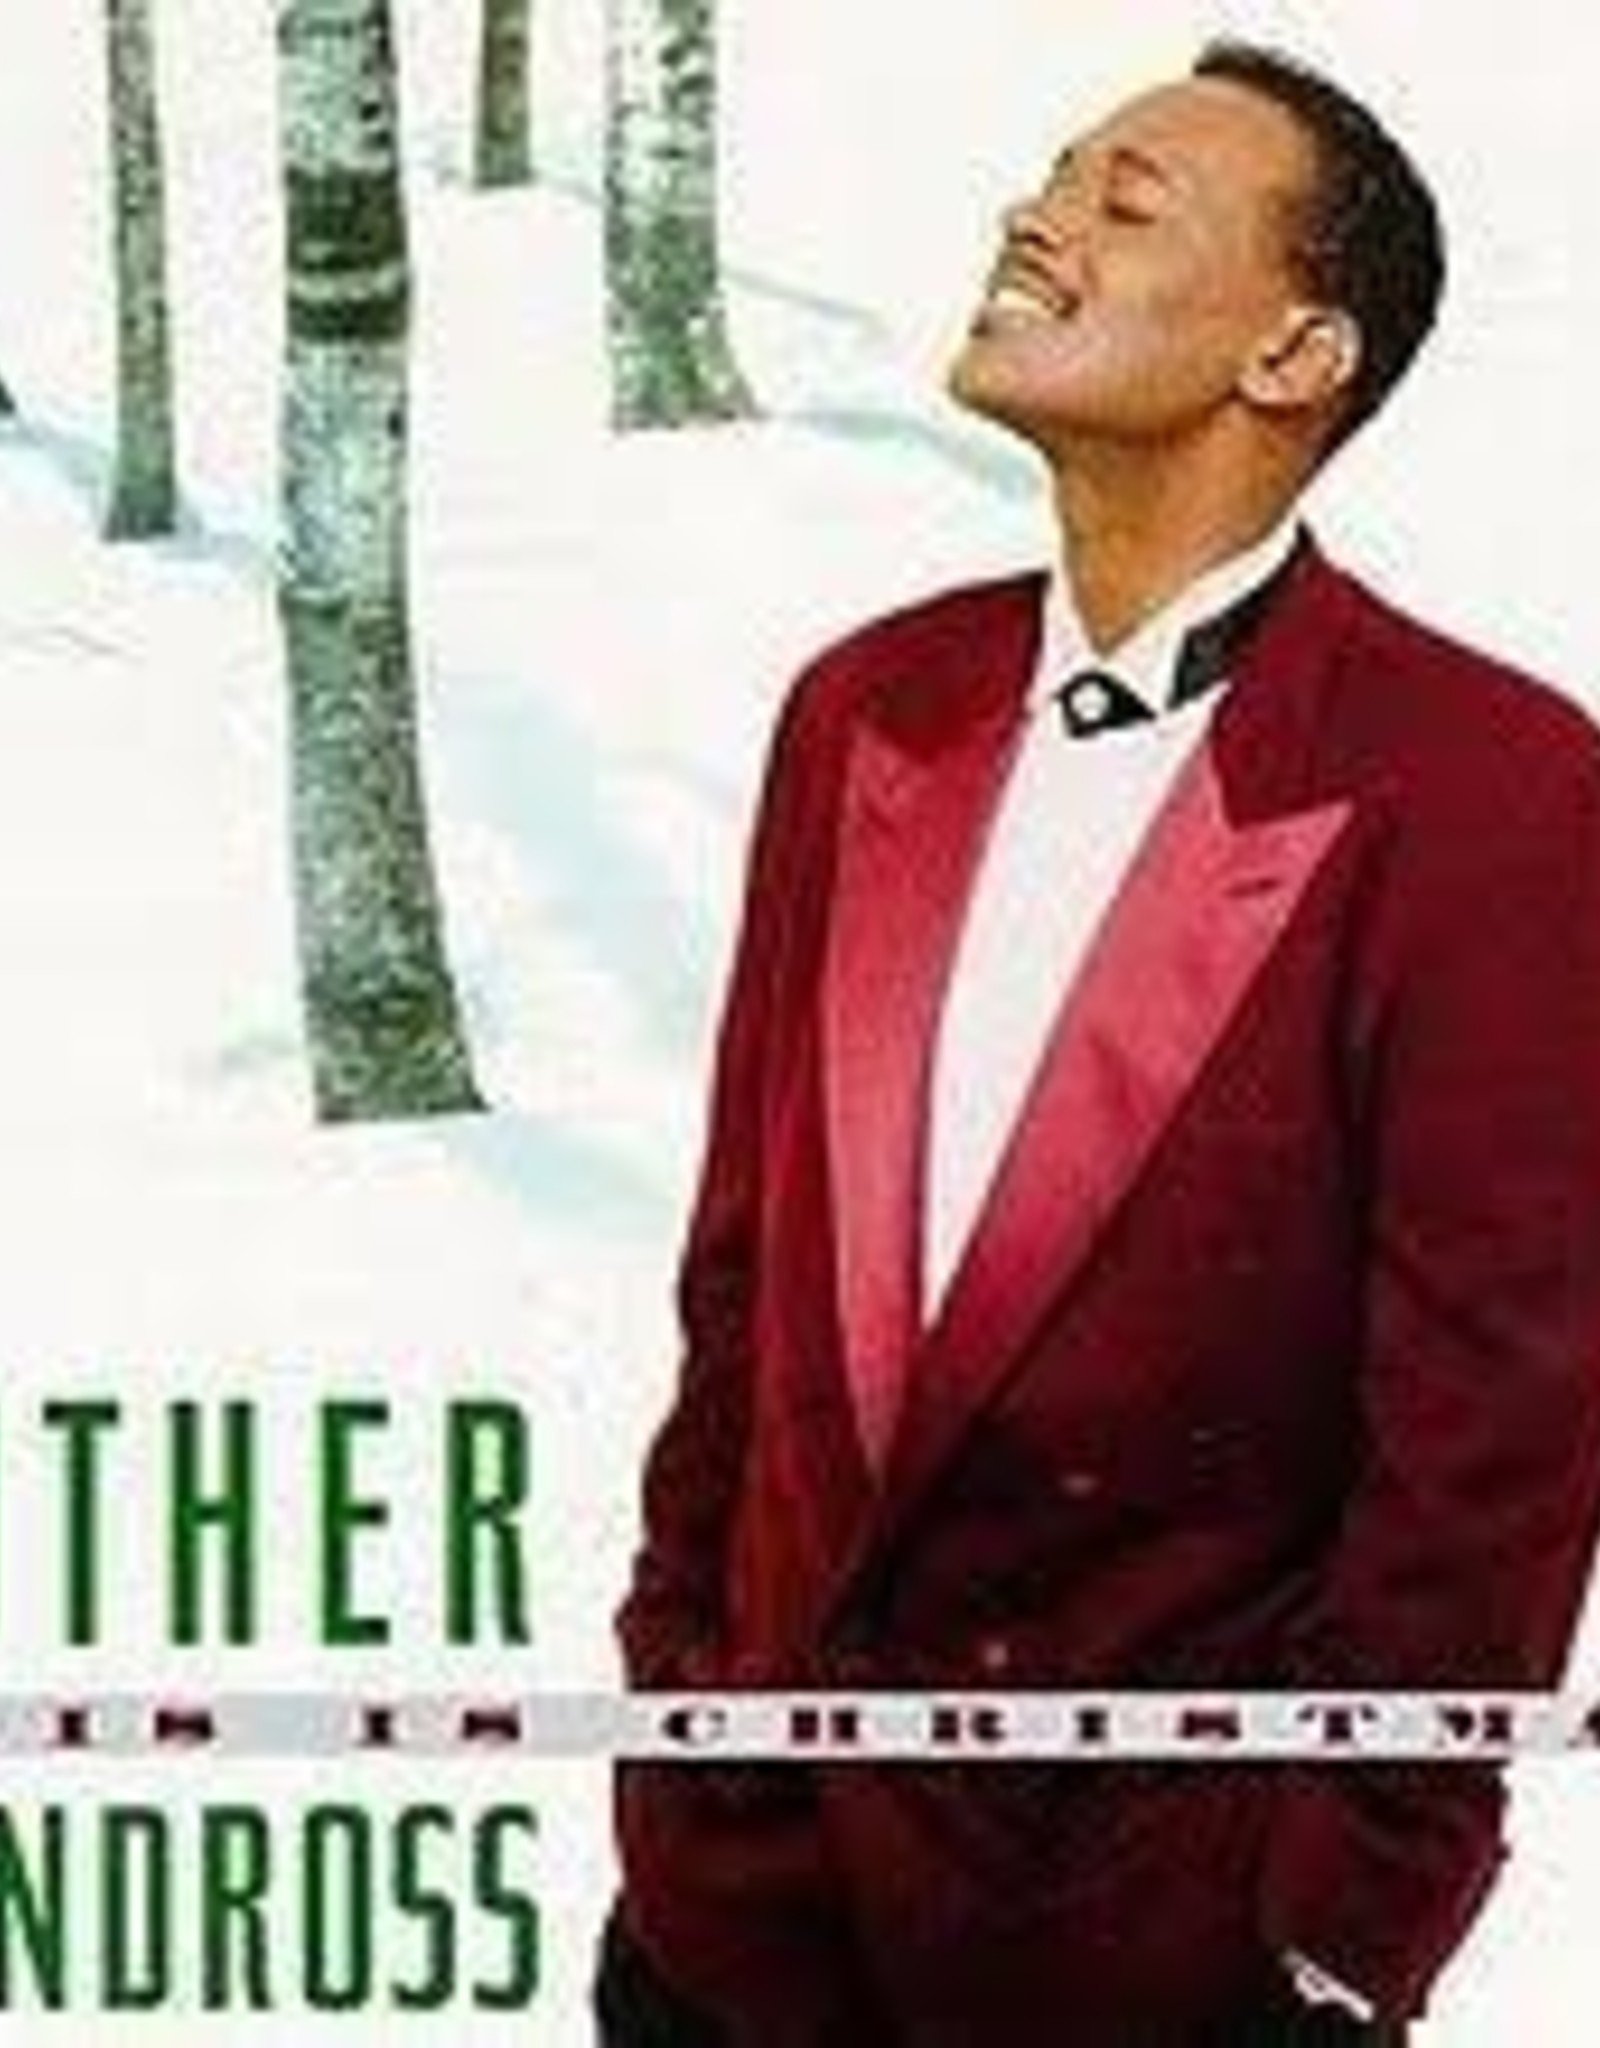 Luther Vandross - This is Christmas